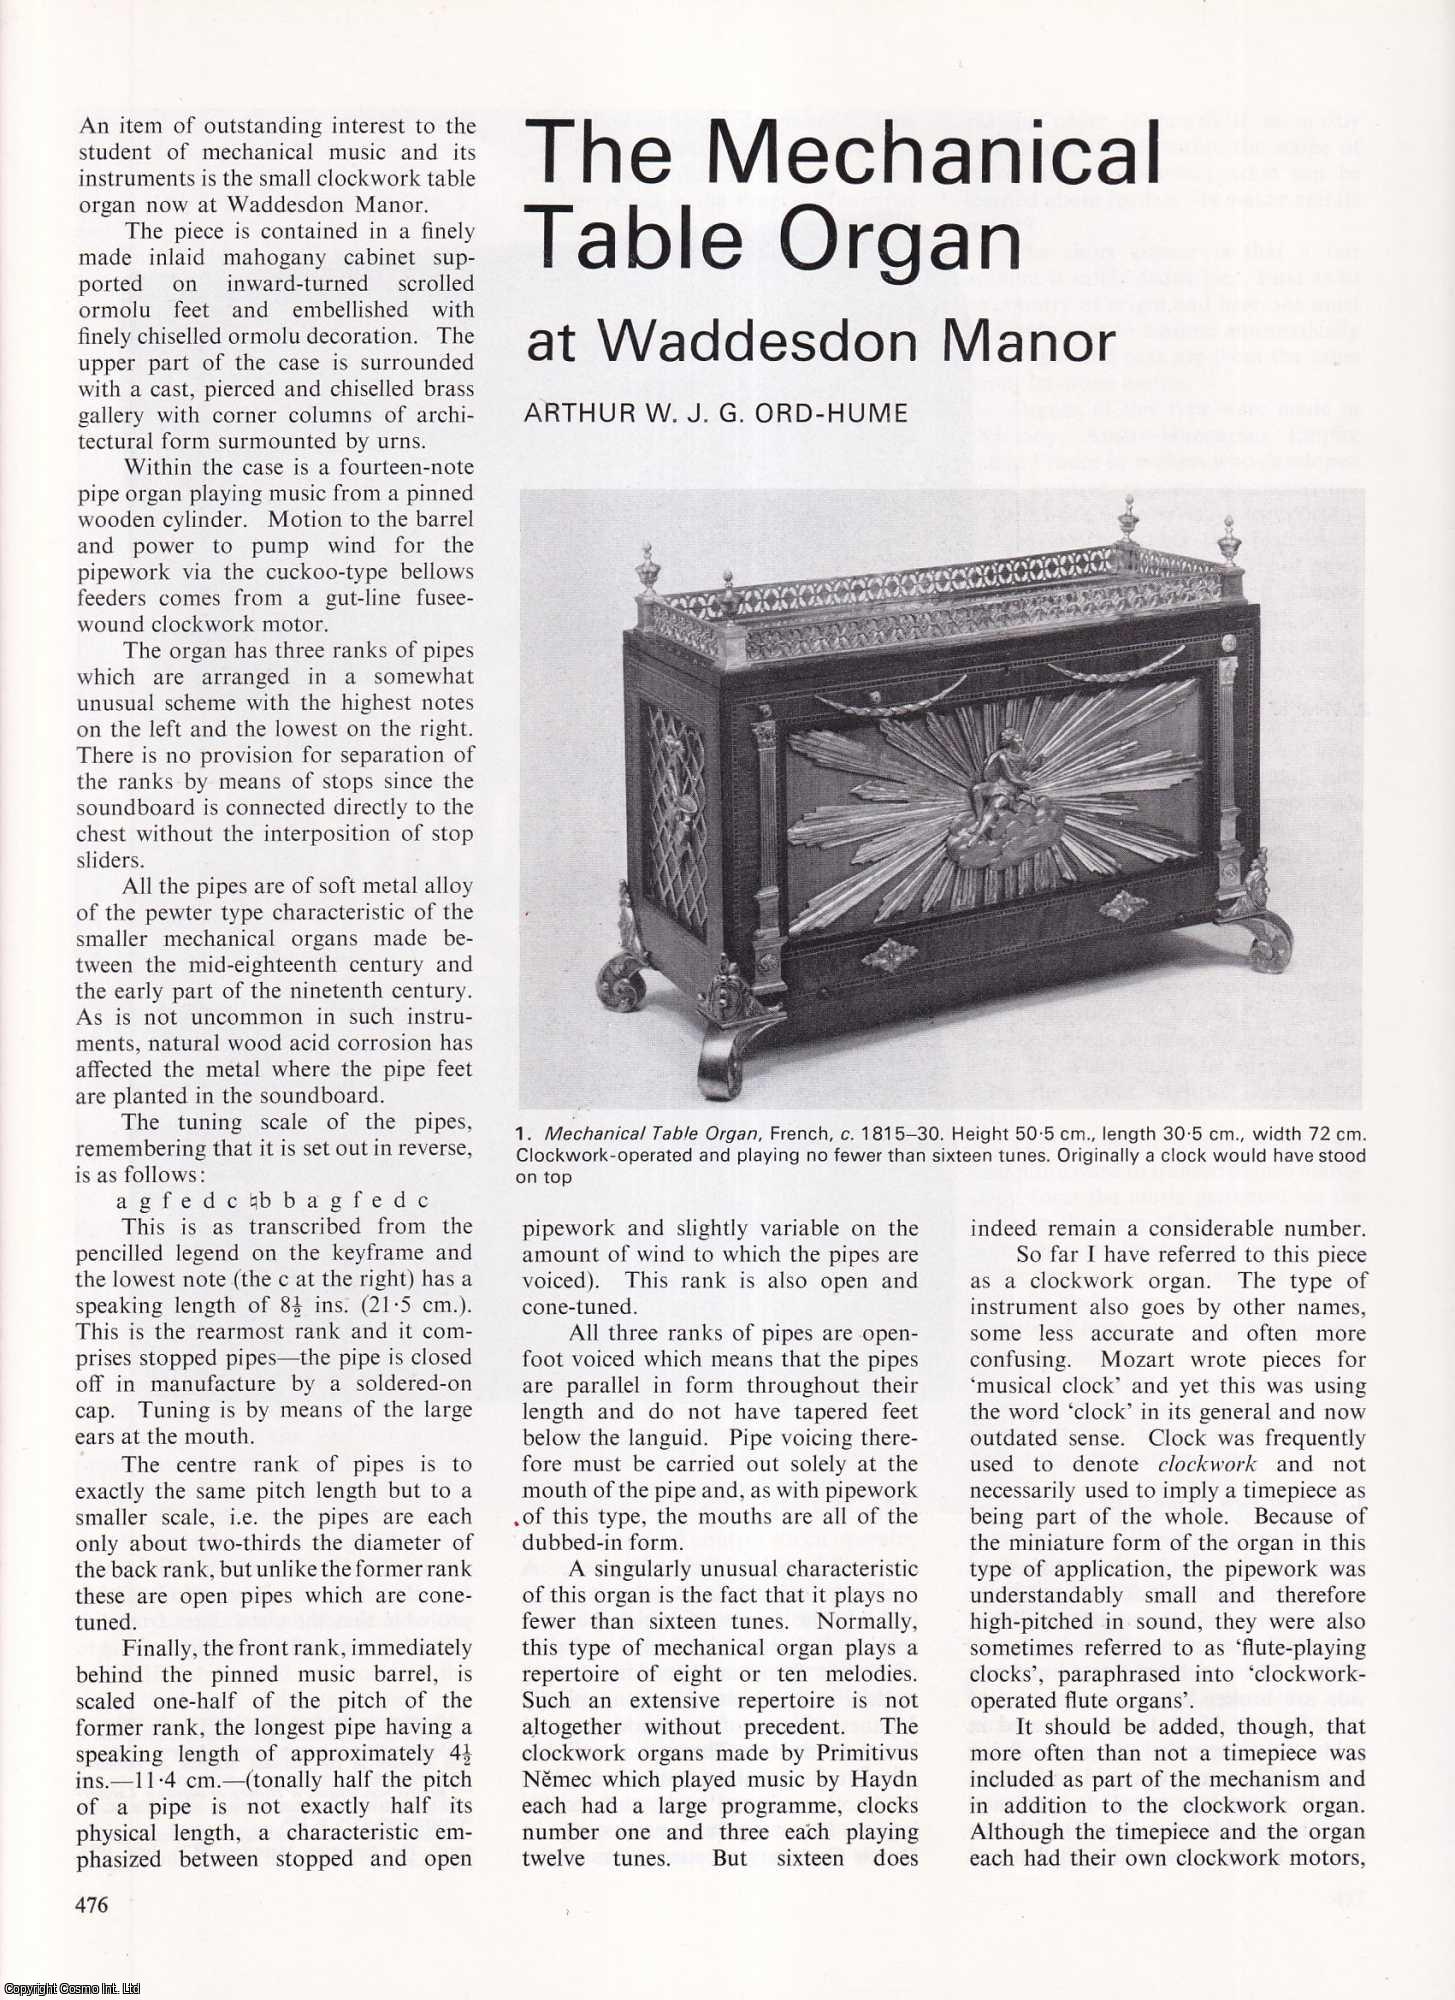 Arthur W.J.G. Ord-Hume - The Mechanical Table Organ at Waddesdon Manor. An original article from Apollo, International Magazine of the Arts, 1977.